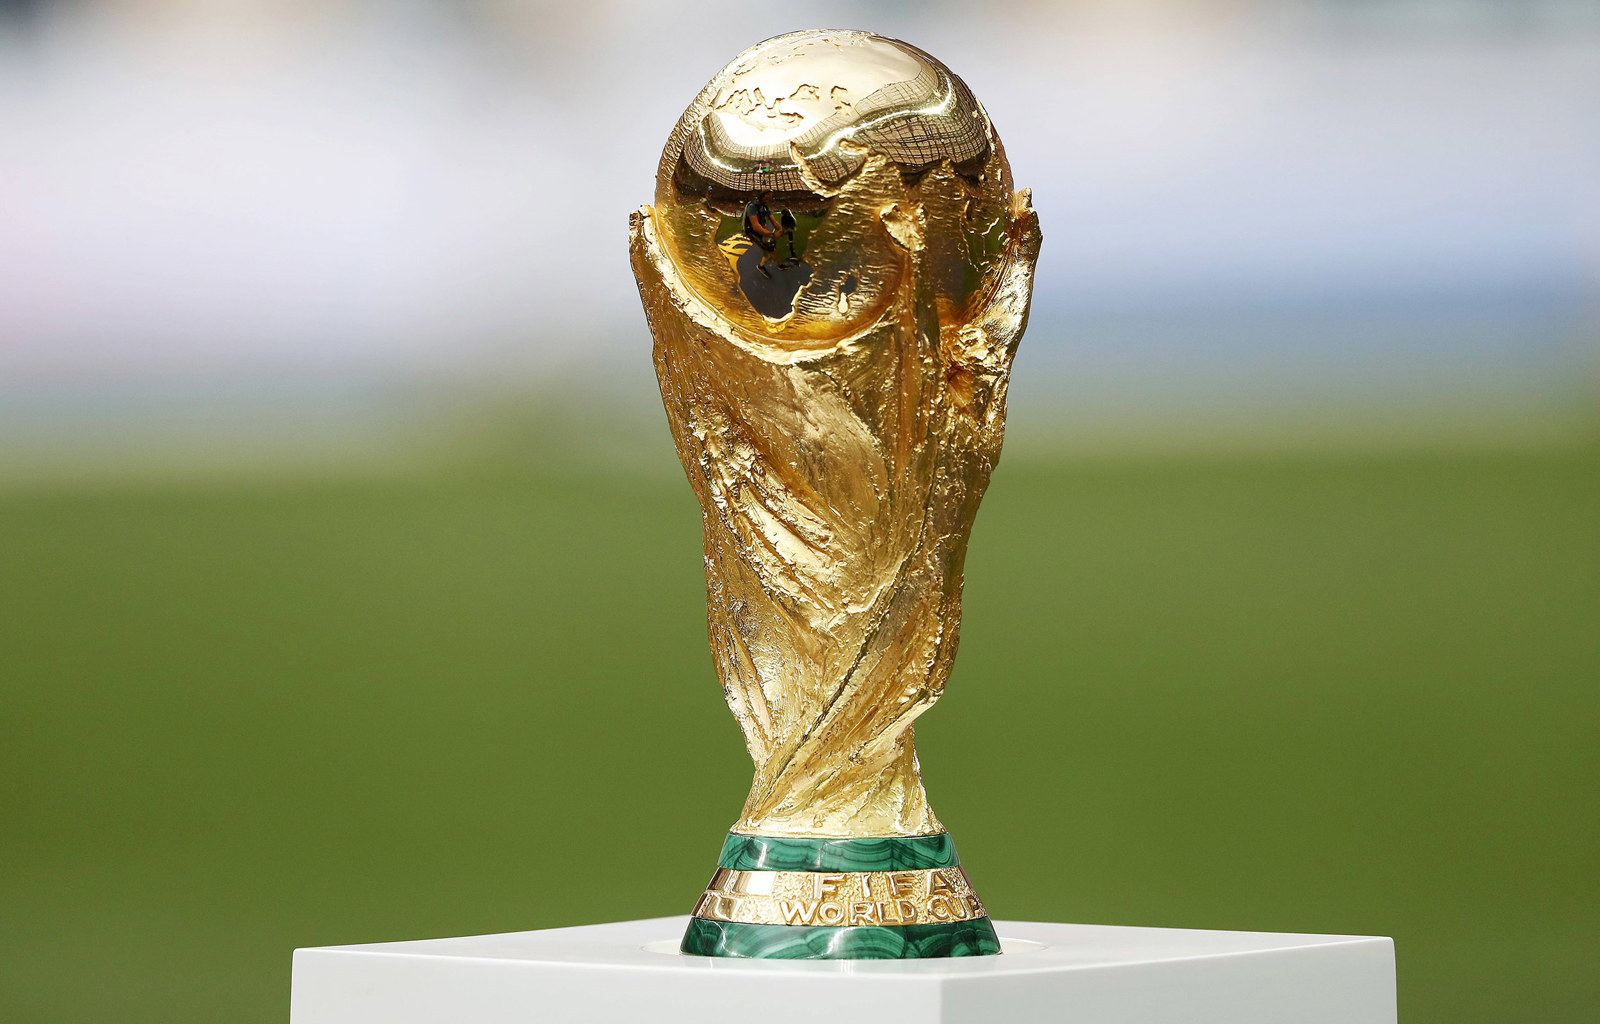 World Cup 2026 update: Four-team groups and more games confirmed